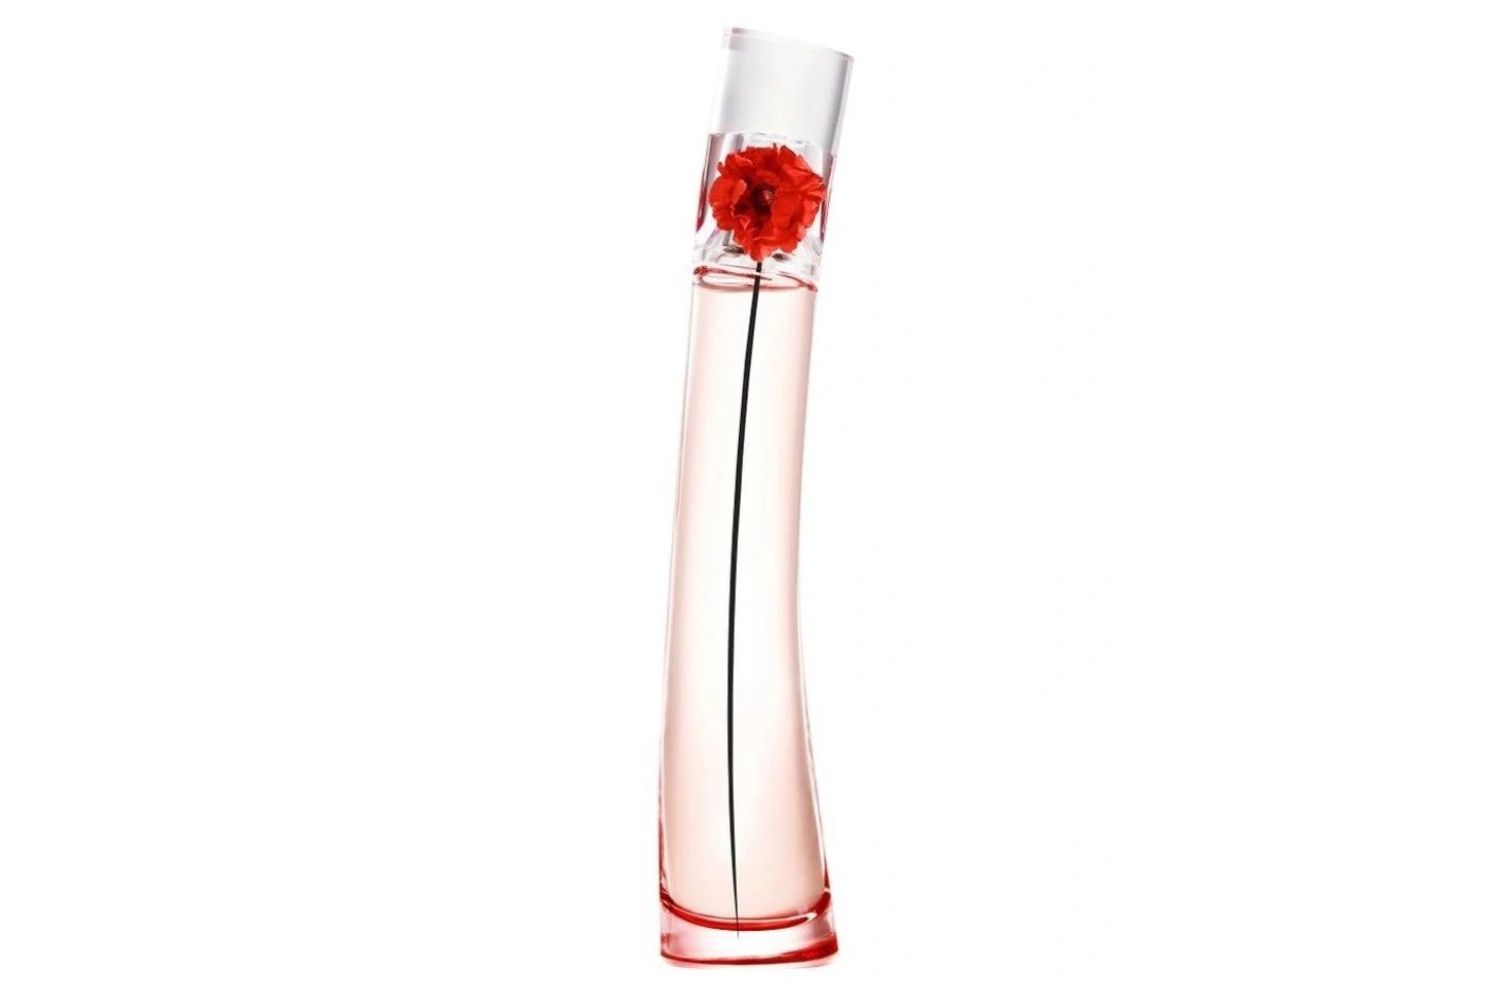 Flower By Kenzo L’Absolue EDP, 100ml, $232 at Myer